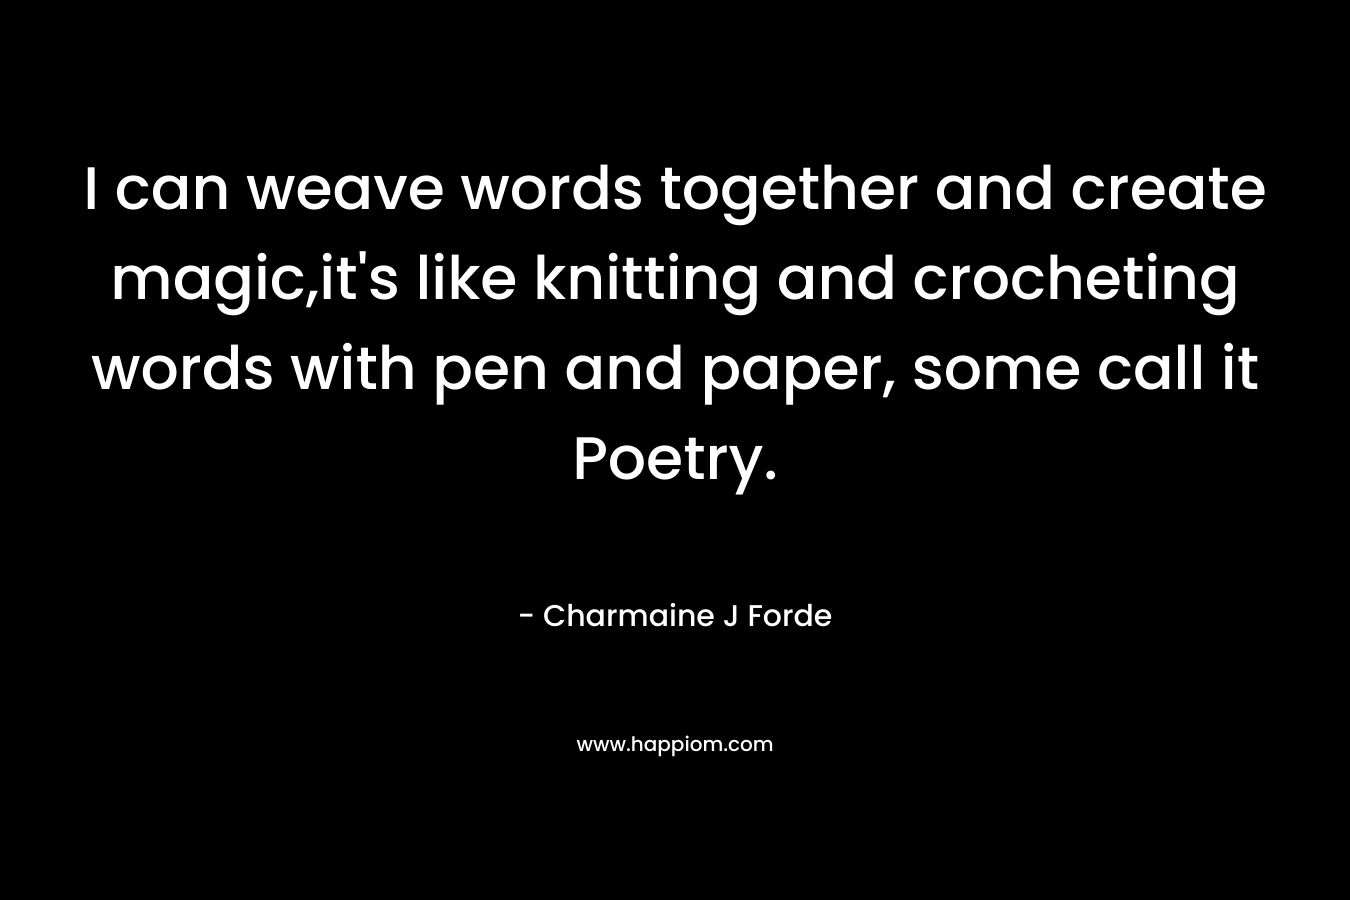 I can weave words together and create magic,it’s like knitting and crocheting words with pen and paper, some call it Poetry. – Charmaine J Forde